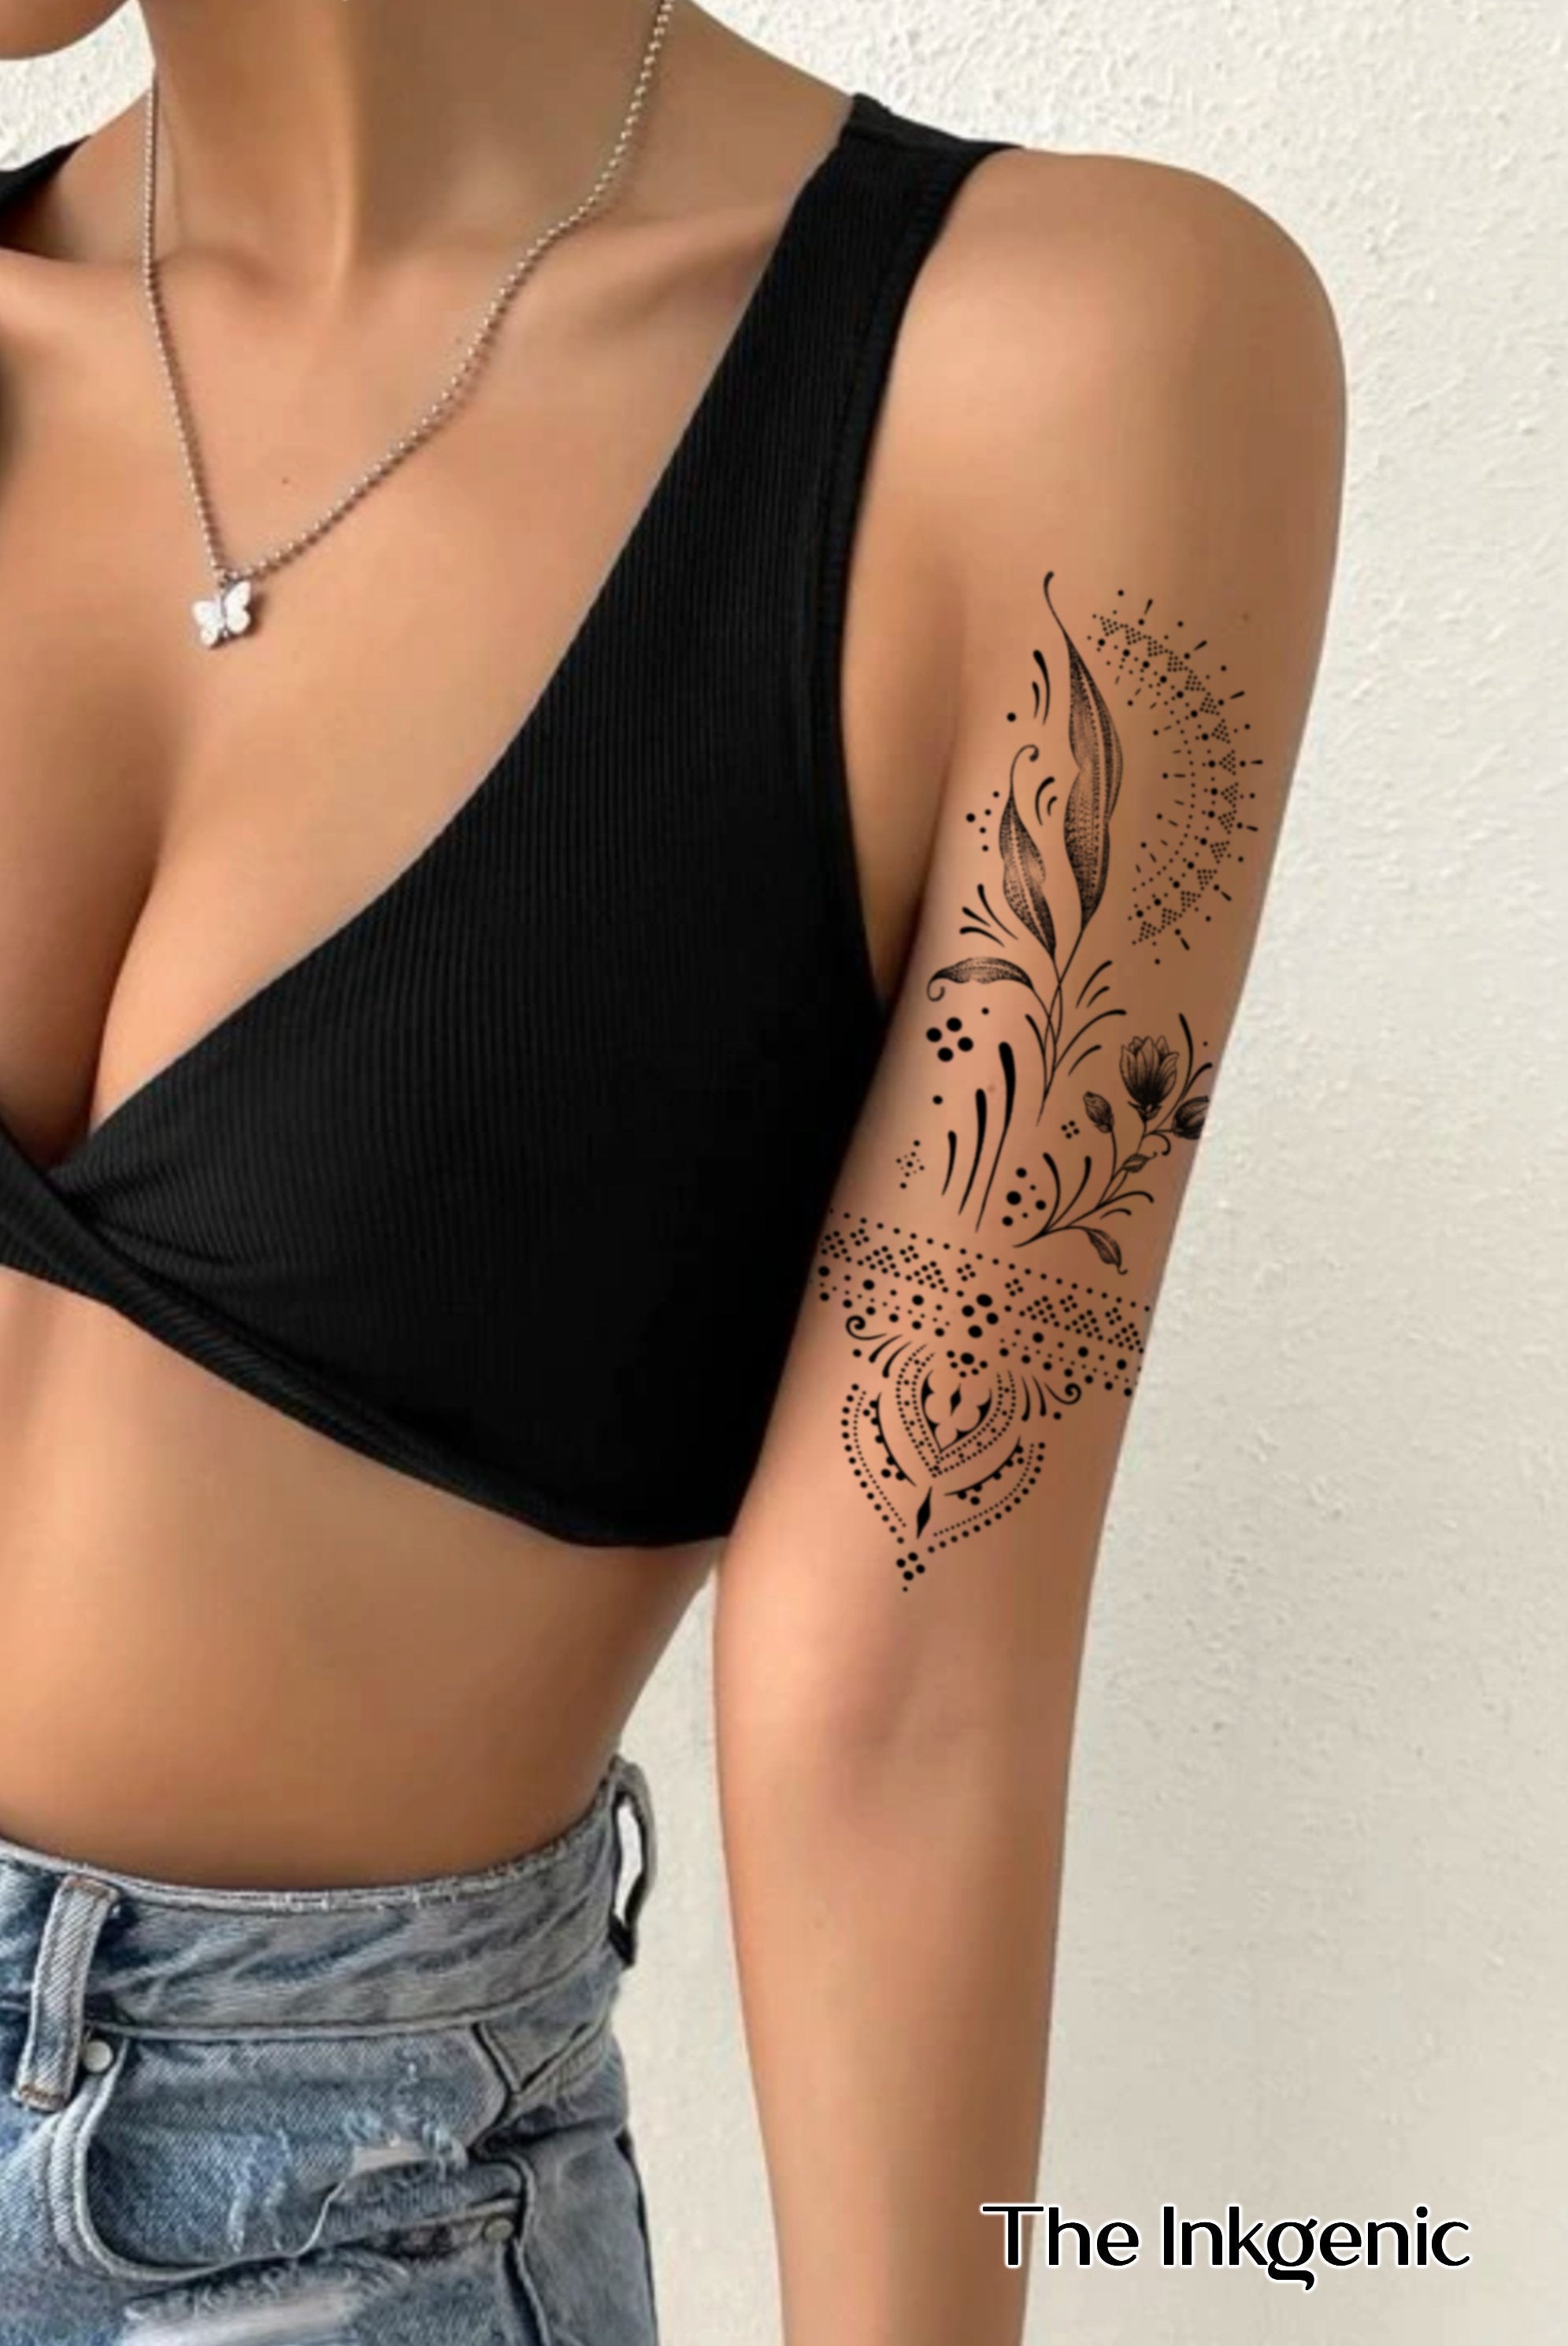 Phoenix tattoo meaning for men and women, photos, sketches